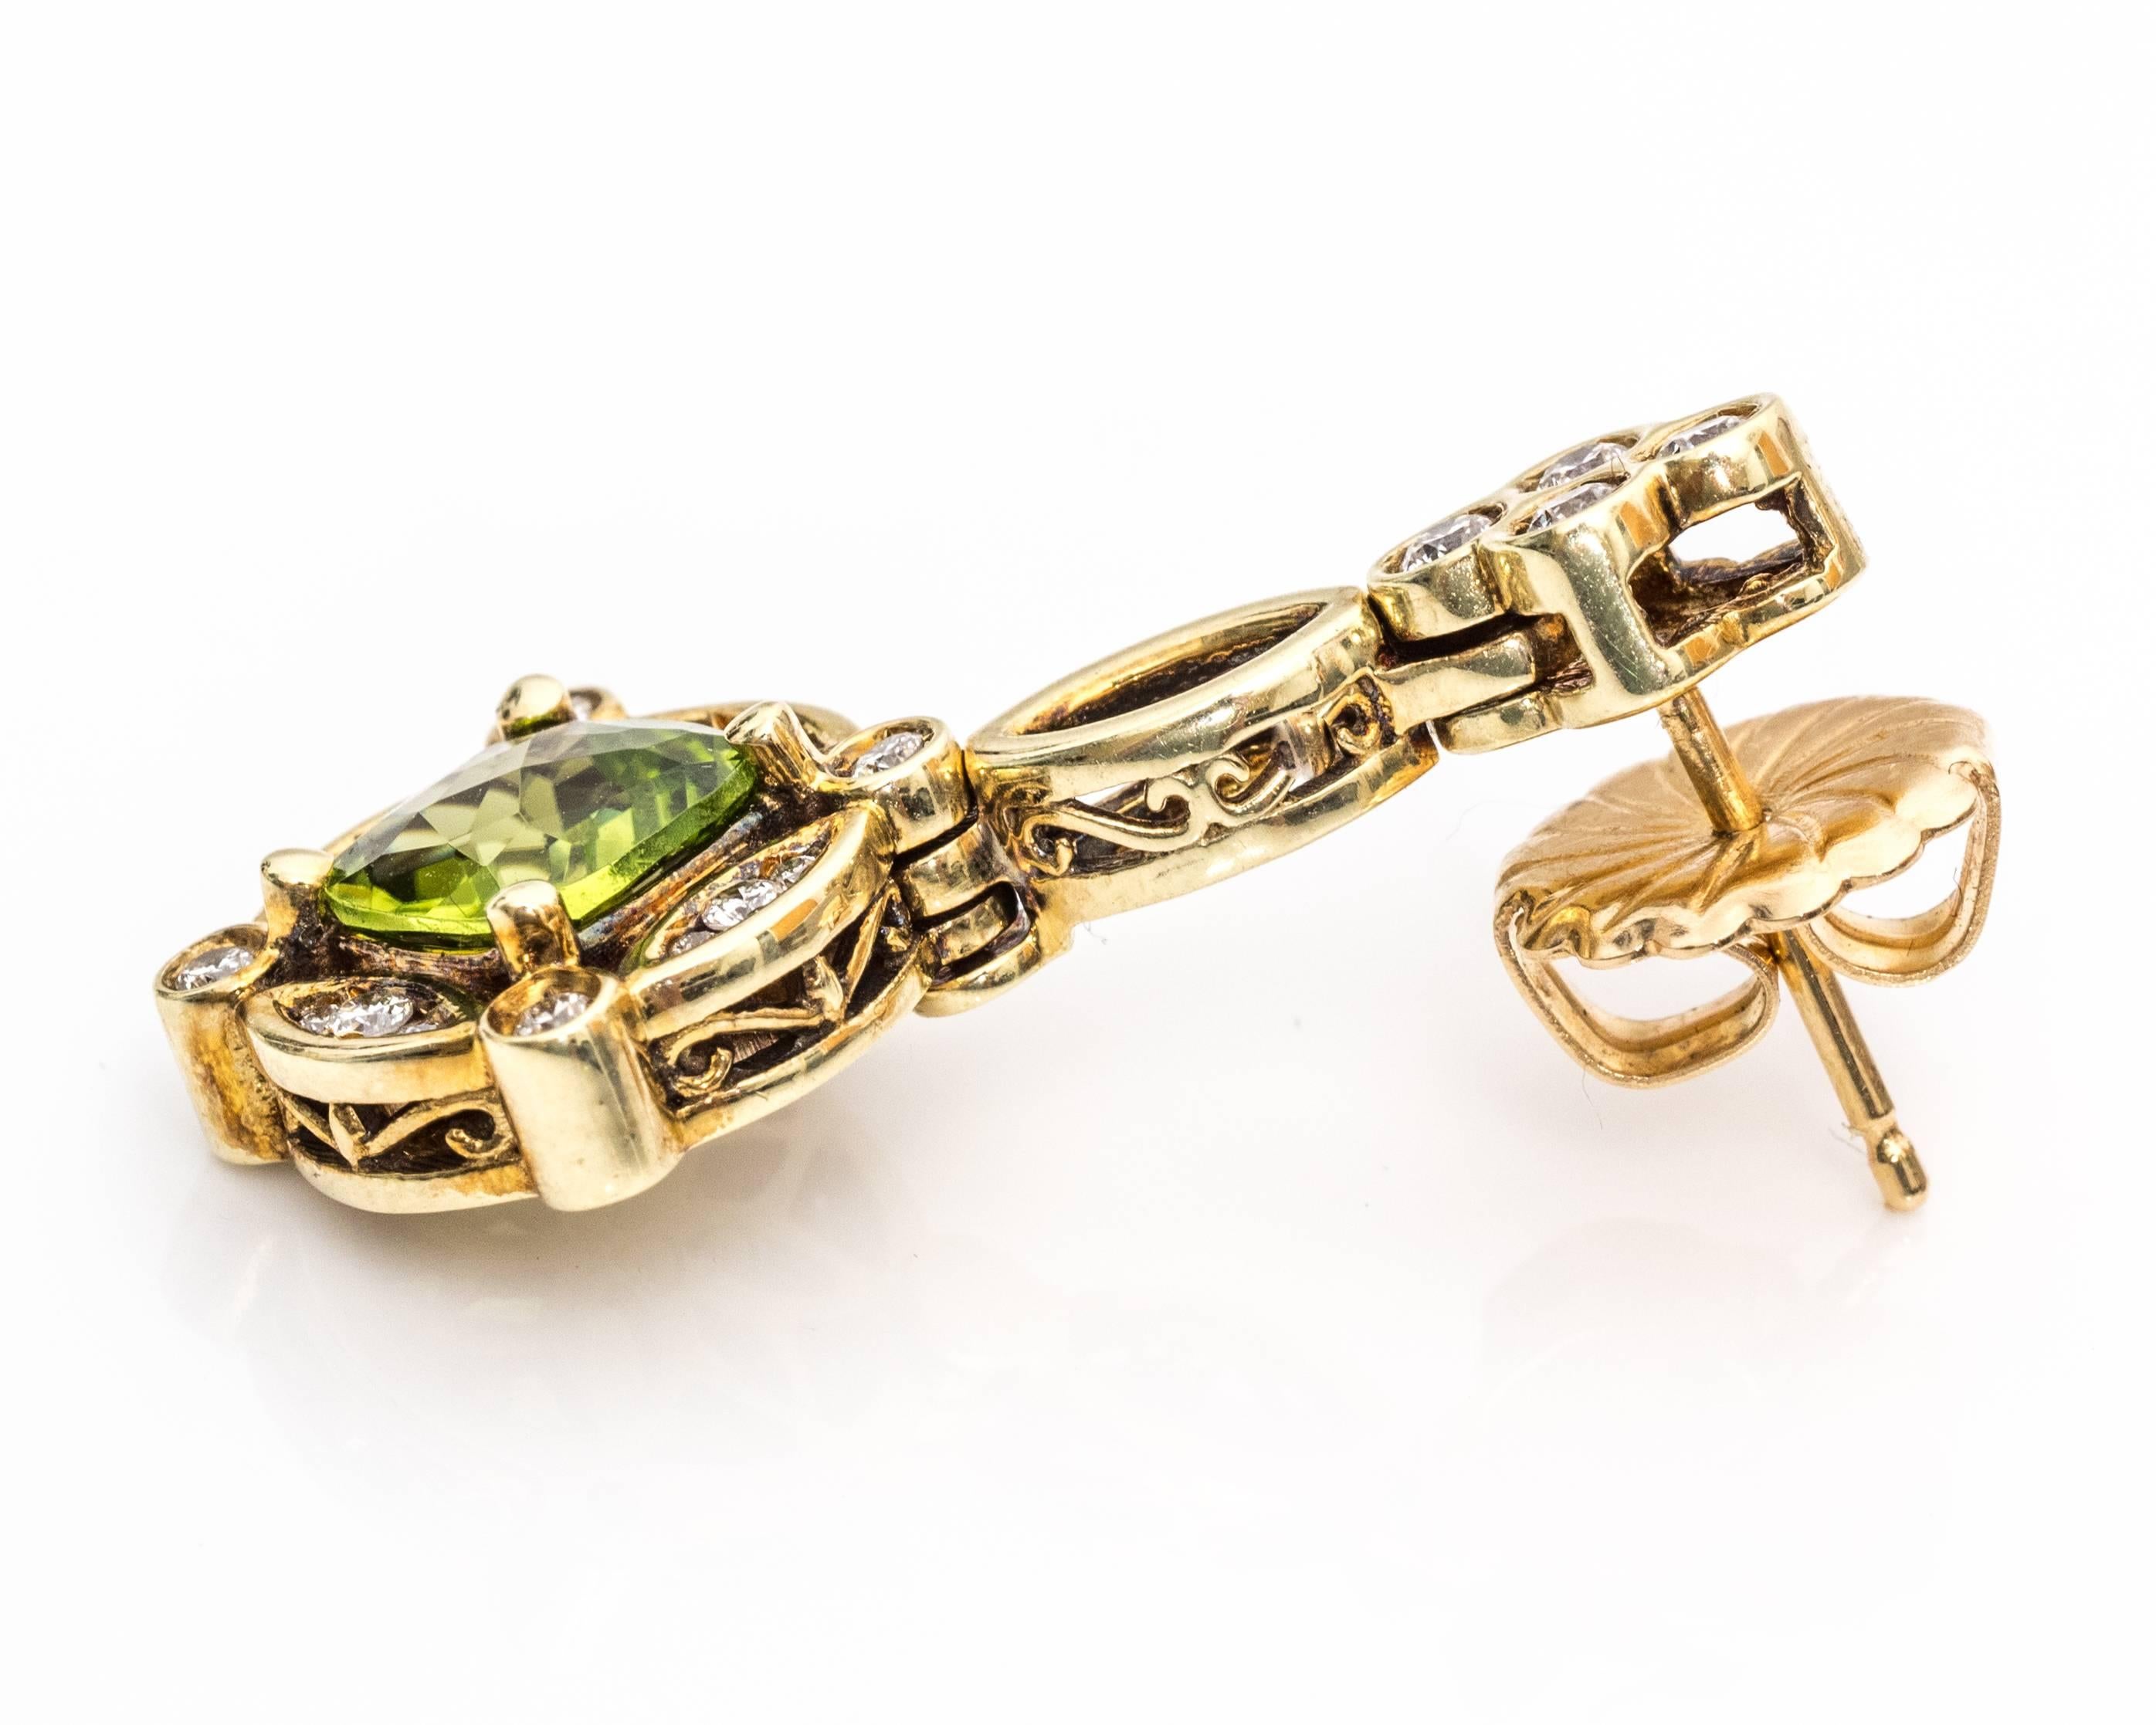 1950s Chandelier Earrings - 14 Karat Yellow Gold, Peridot, Diamonds

The center peridot stones are 1 carat each (2 carat total weight) with a cushion shape. At each corner of the peridot, there is a diamond set in a bezel frame. Between these four